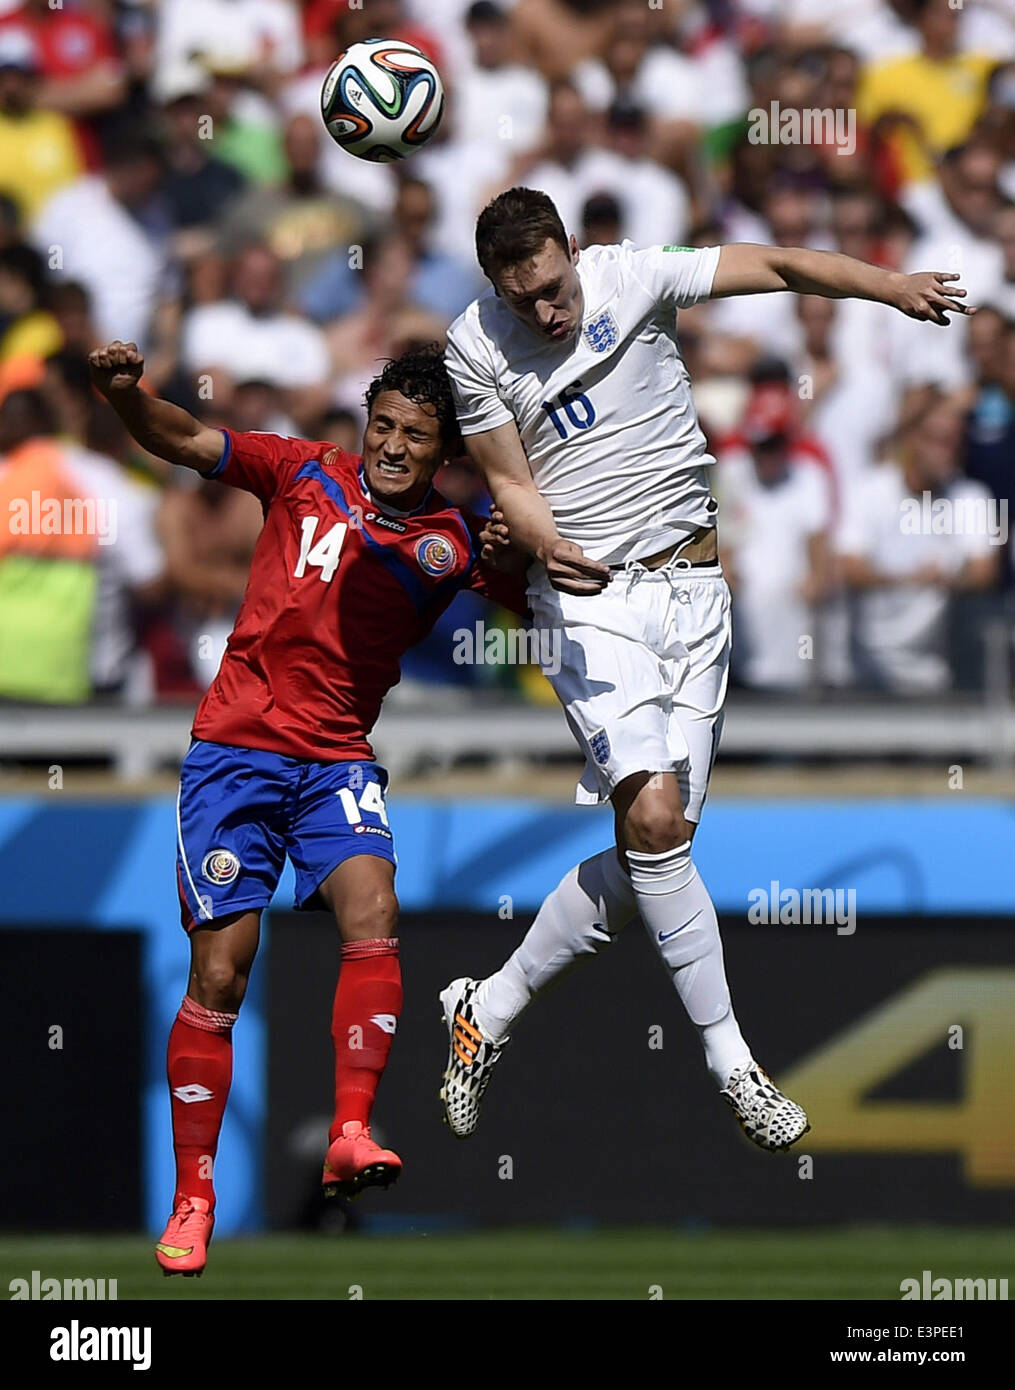 Belo Horizonte, Brazil. 24th June, 2014. Costa Rica's Randall Brenes (L) competes for a header with England's Phil Jones during a Group D match between Costa Rica and England of 2014 FIFA World Cup at the Estadio Mineirao Stadium in Belo Horizonte, Brazil, on June 24, 2014. © Qi Heng/Xinhua/Alamy Live News Stock Photo